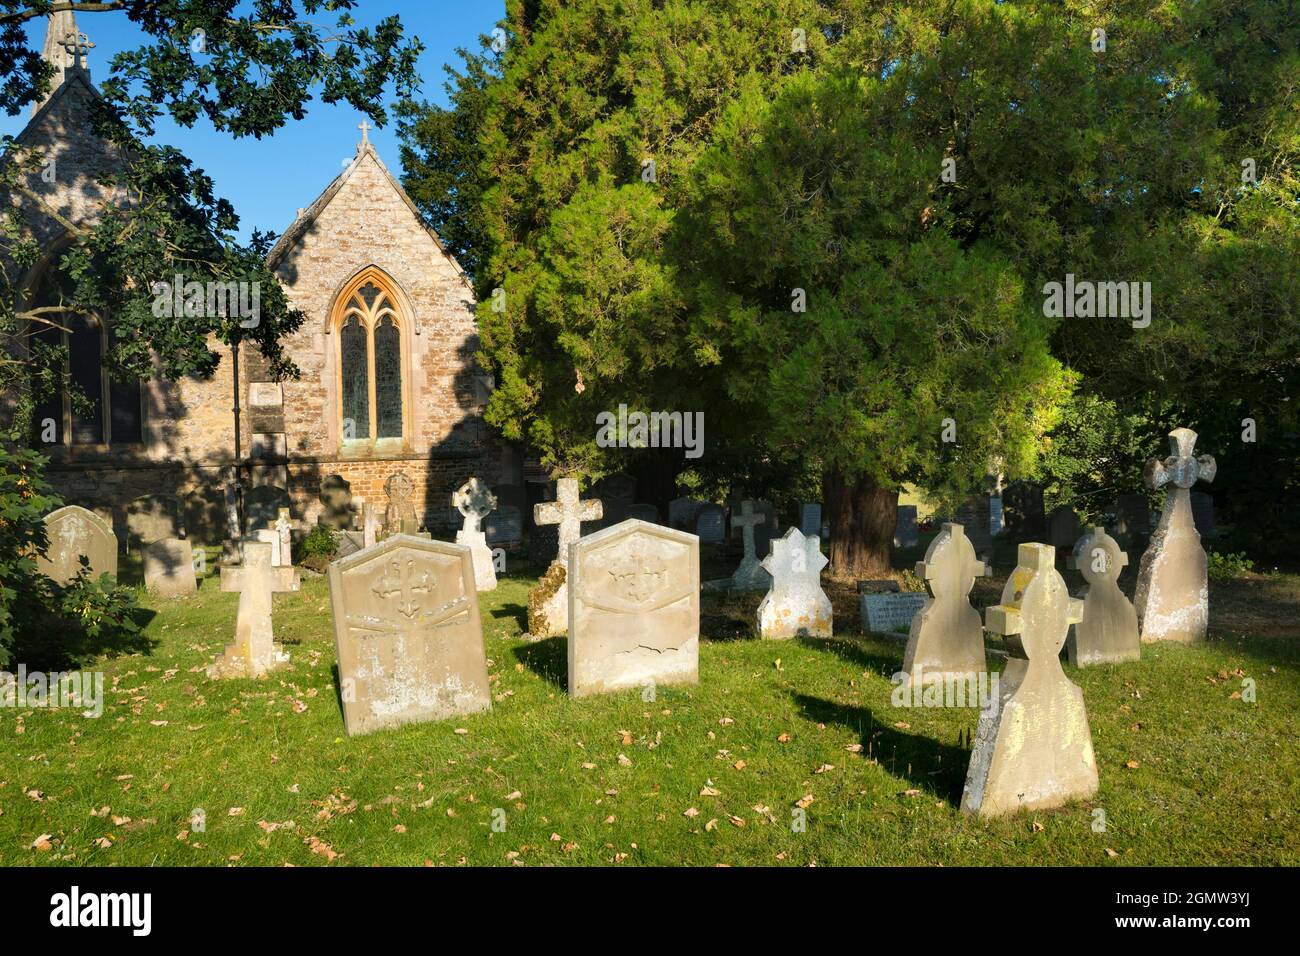 Clifton Hampden, Oxfordshire, England - 17 July 2020   There are many fine old stone parish churches in our area of the Cotswolds. They are often pict Stock Photo